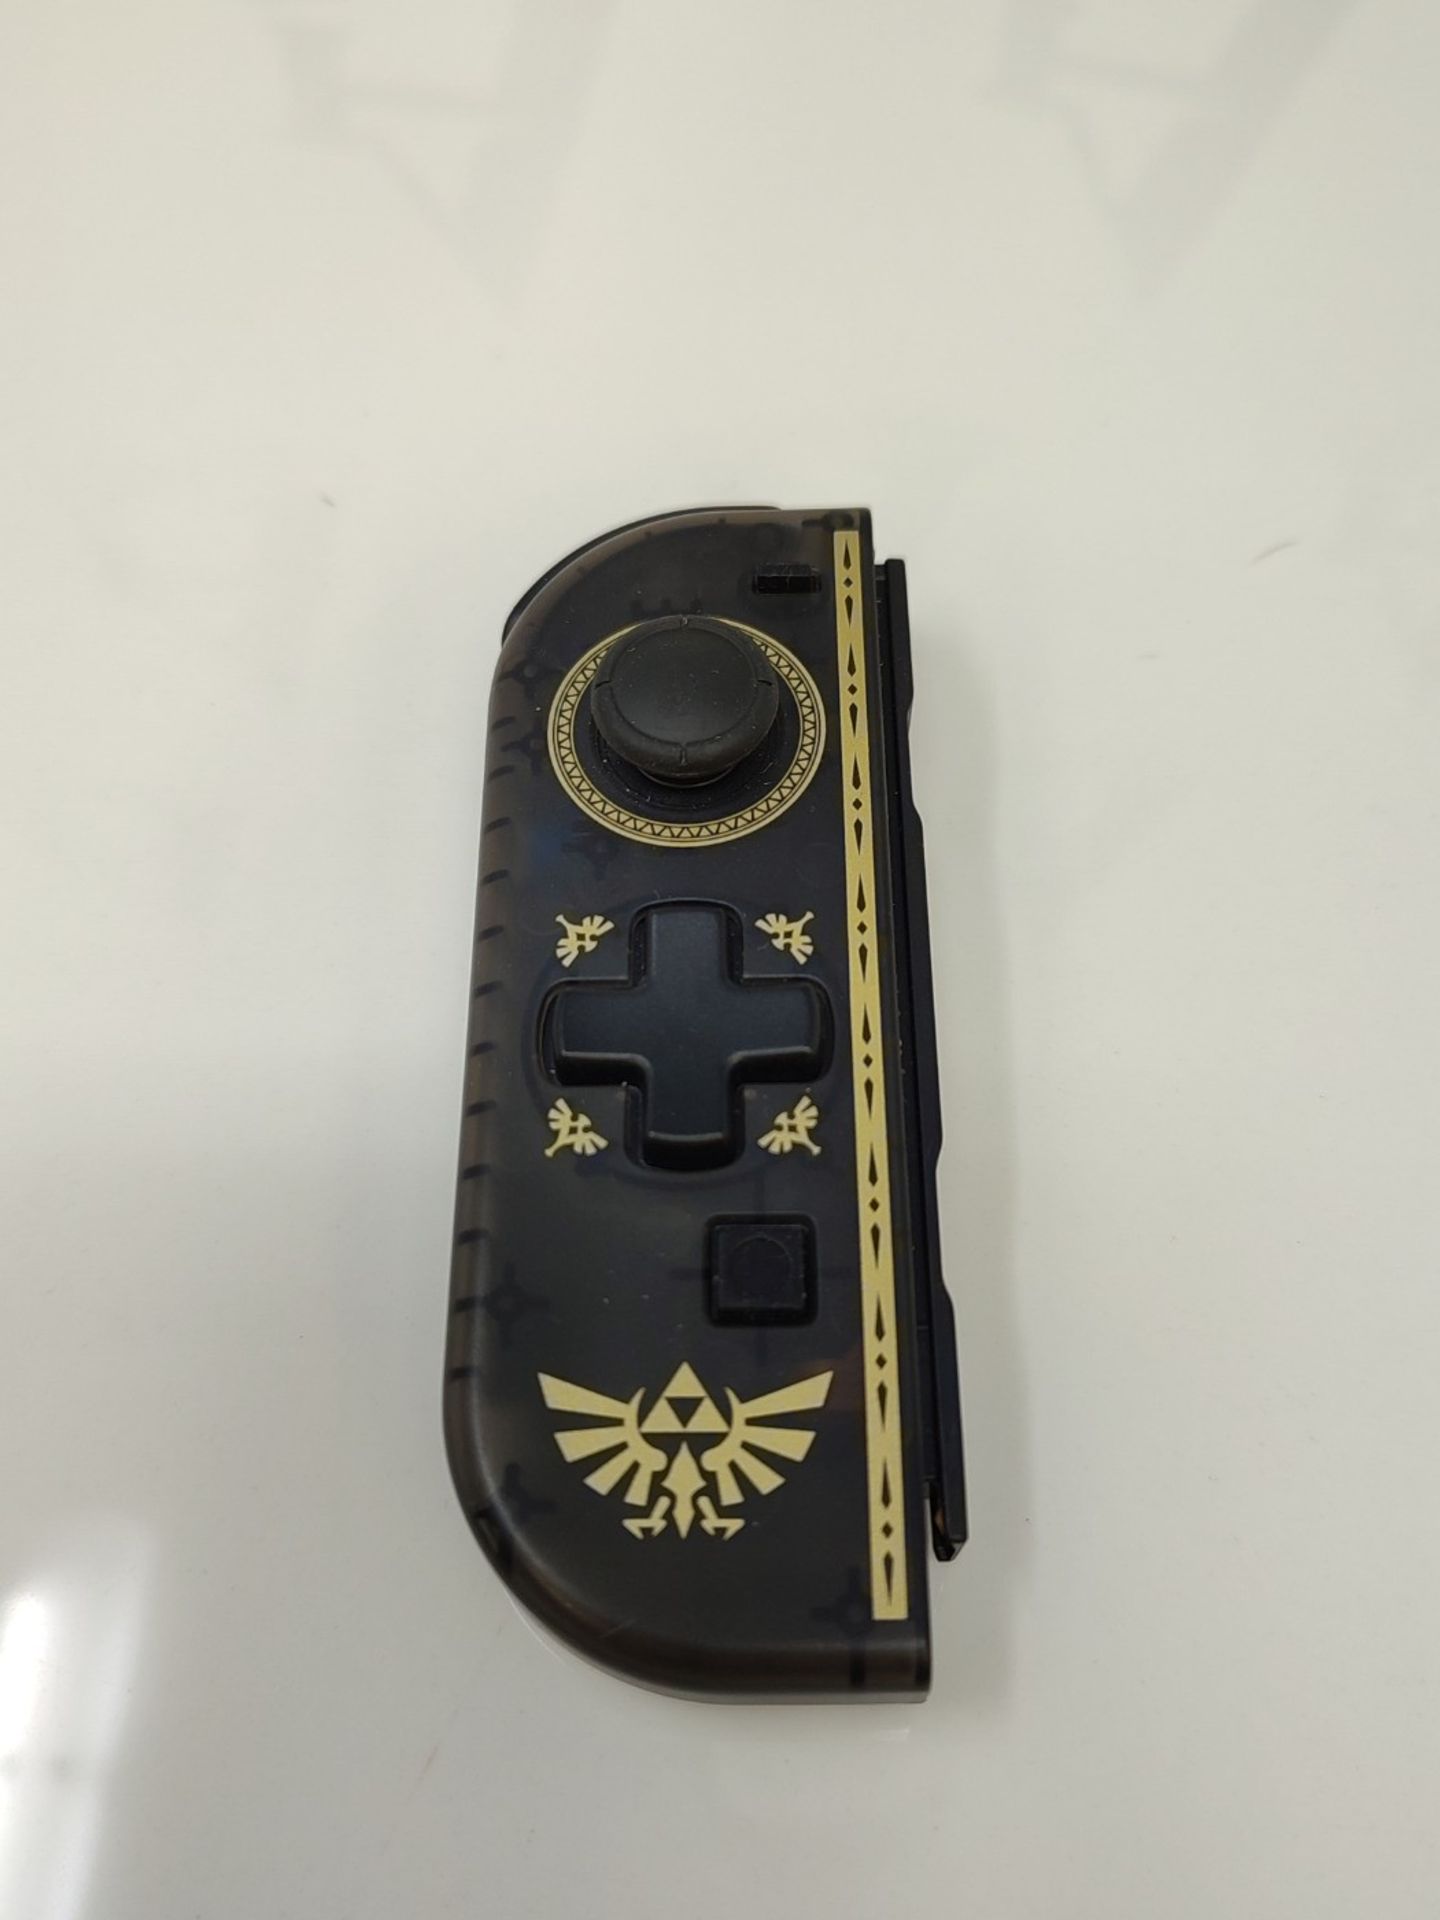 HORI - Left D-Pad Controller Zelda (Nintendo Switch) Only for "handheld mode". - Image 3 of 3